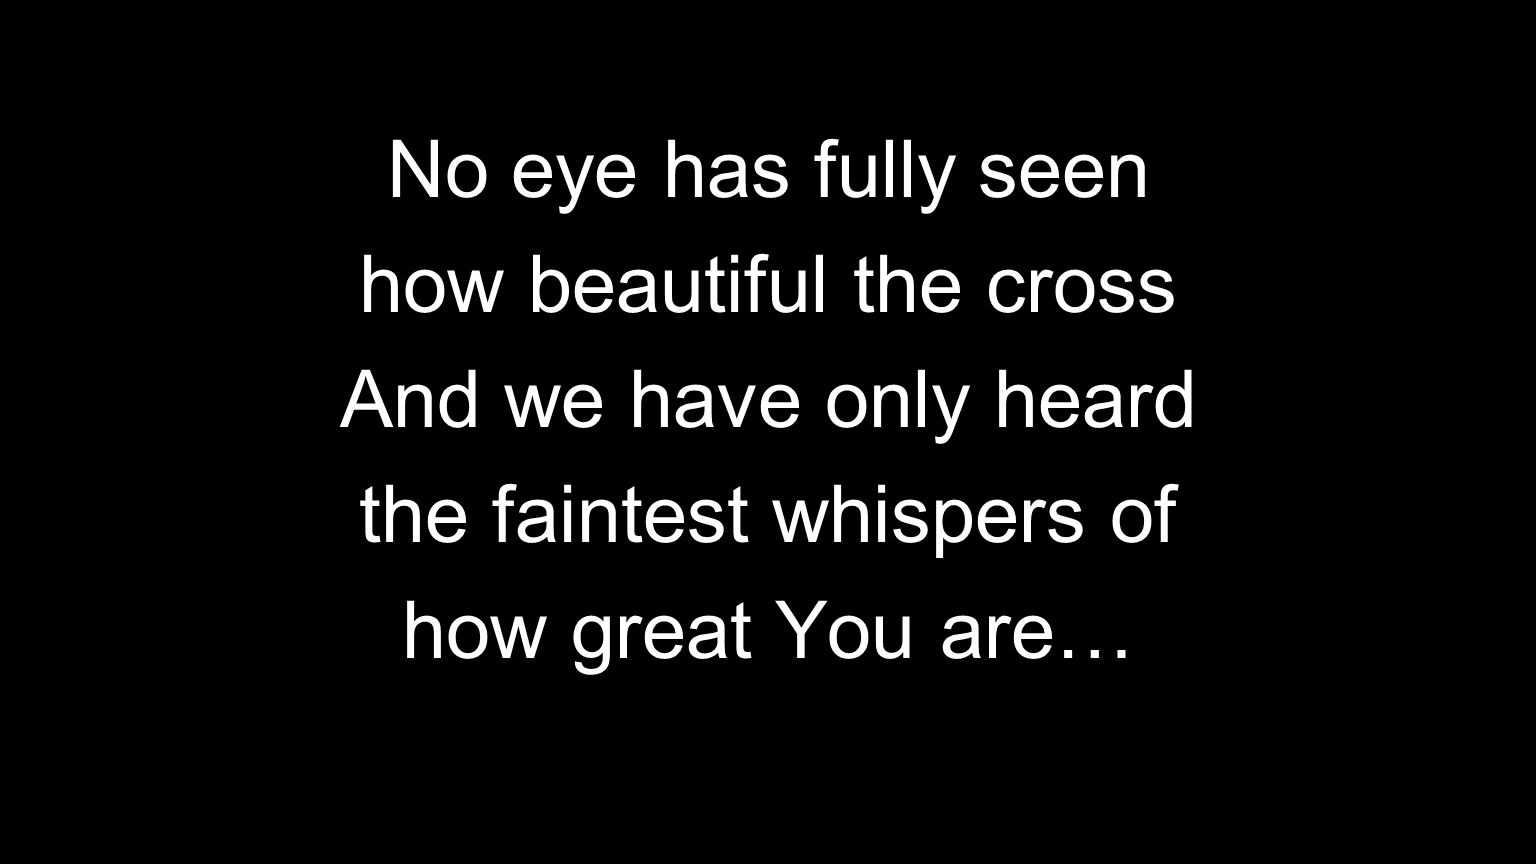 No eye has fully seen how beautiful the cross And we have only heard the faintest whispers of how great You are…